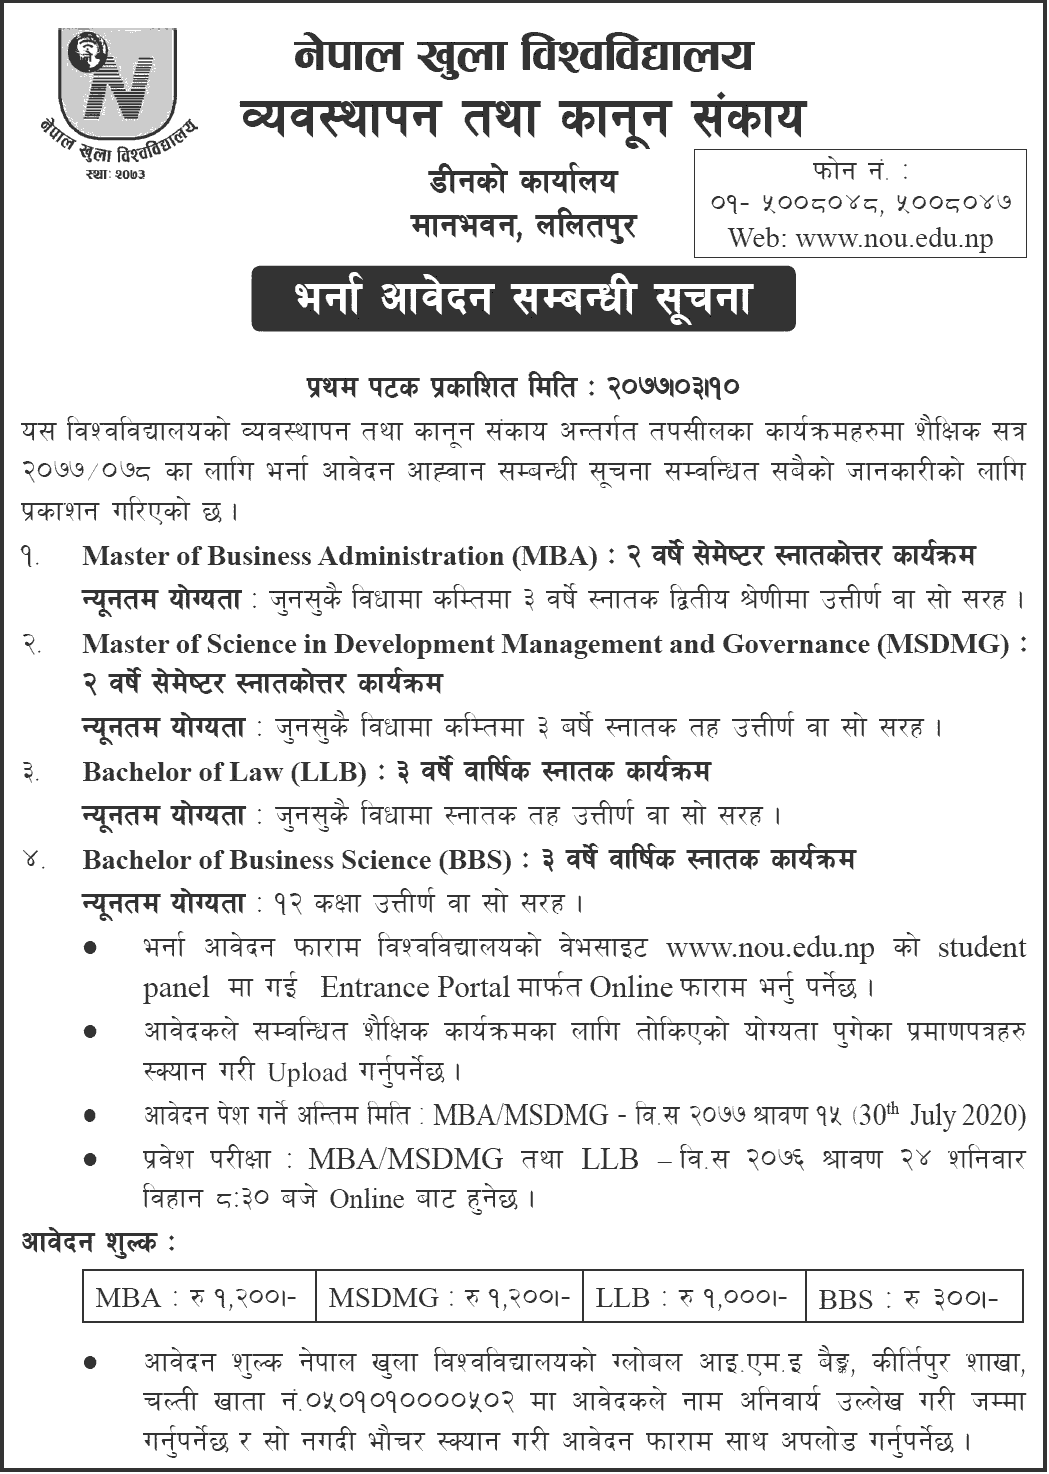 Nepal Open University Admission Open for MBA, MSDMG, LLB and BBS